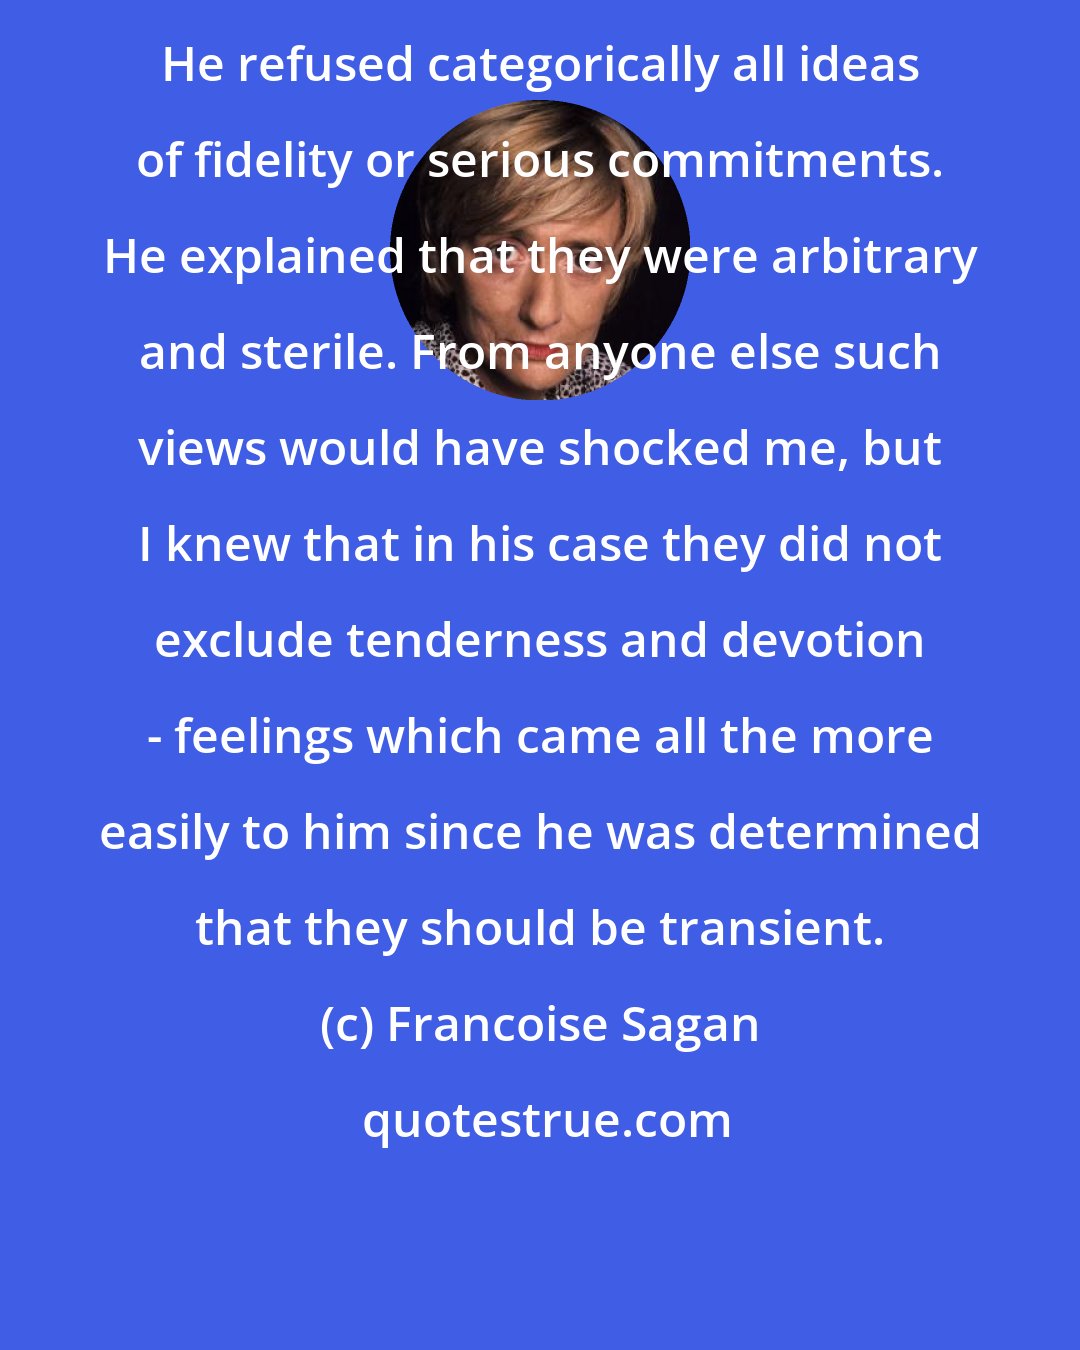 Francoise Sagan: He refused categorically all ideas of fidelity or serious commitments. He explained that they were arbitrary and sterile. From anyone else such views would have shocked me, but I knew that in his case they did not exclude tenderness and devotion - feelings which came all the more easily to him since he was determined that they should be transient.